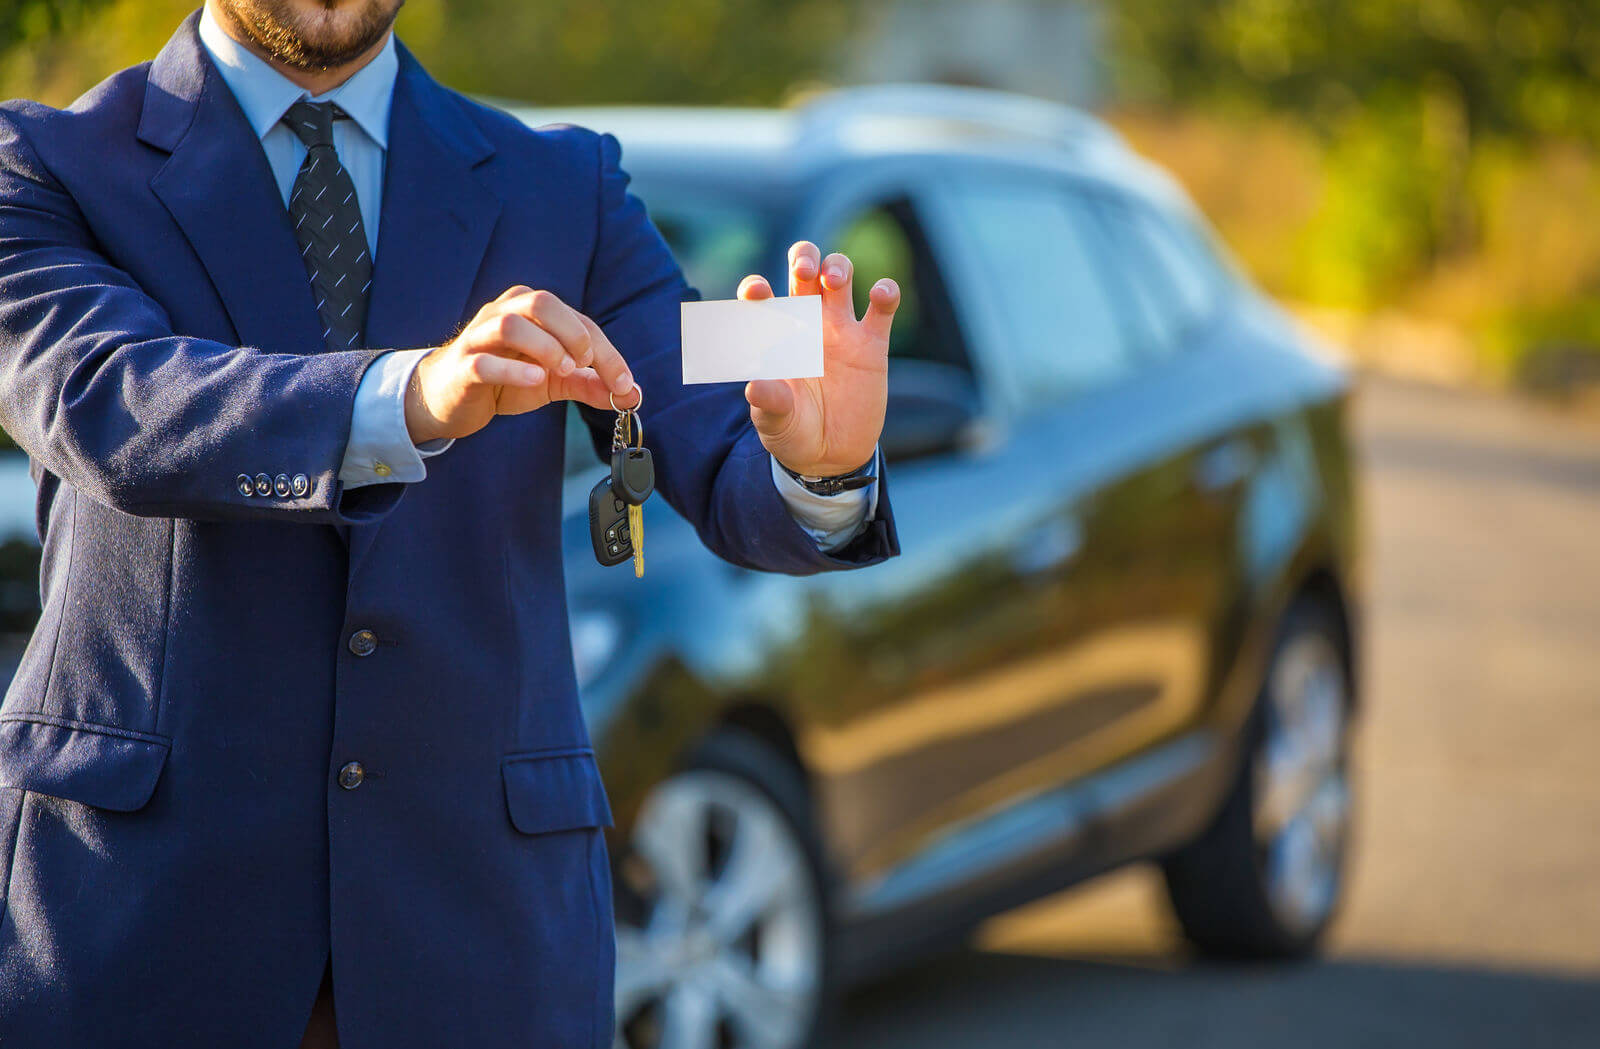 How to Find Inexpensive Commercial Auto Insurance